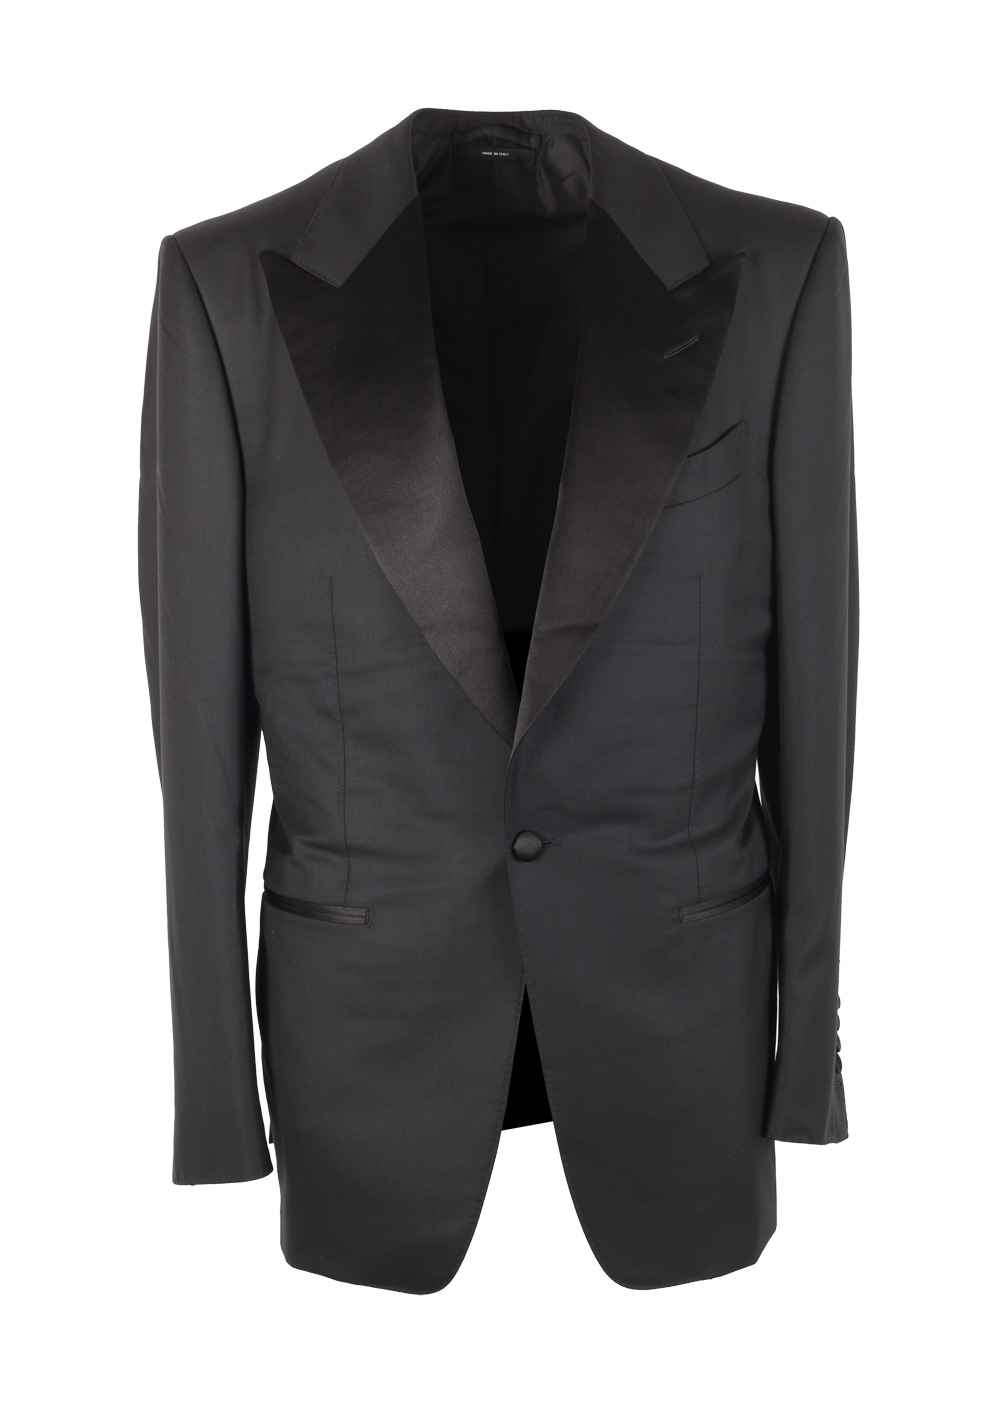 TOM FORD Windsor Black Tuxedo Suit Smoking Size 56 / 46R U.S. Fit A ...